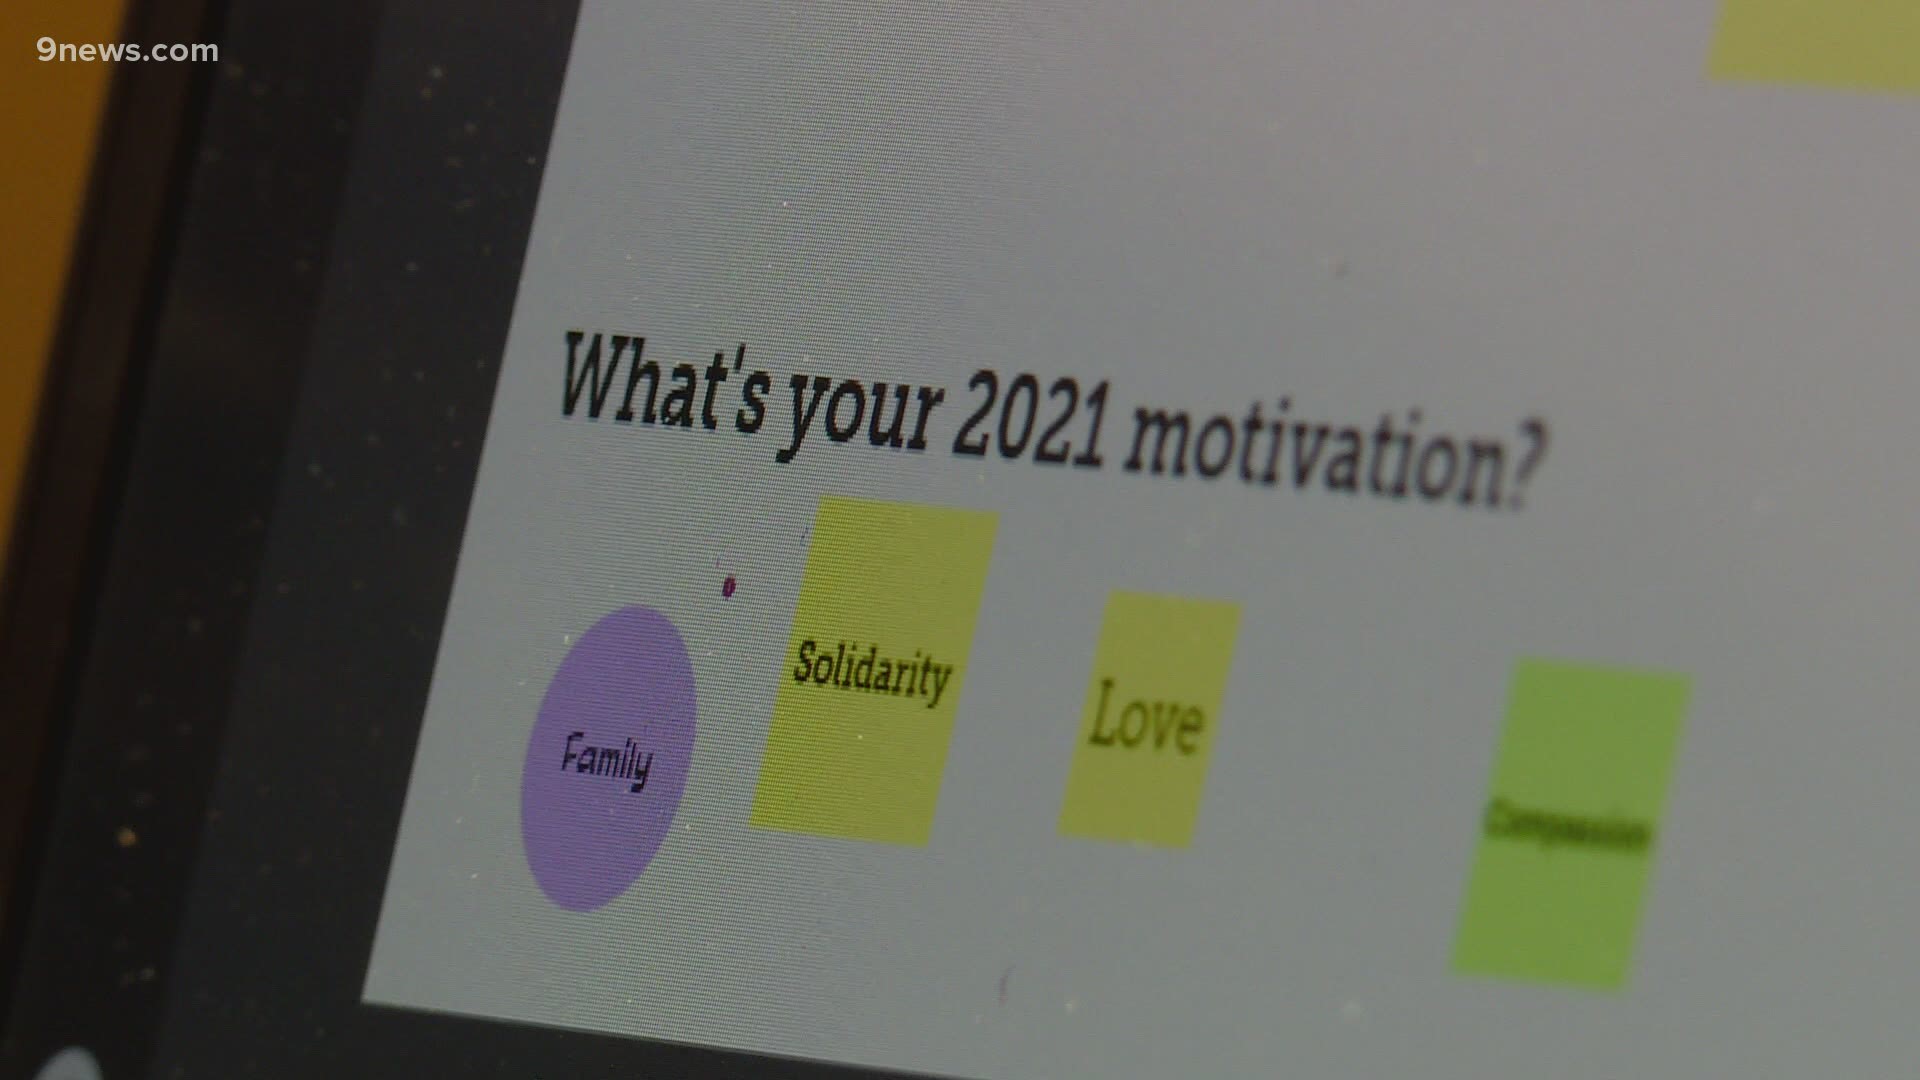 In honor of Kamala Harris breaking ceilings, Women's March Denver got to work Wednesday morning, launching a virtual motivation mural in place of a gathering.